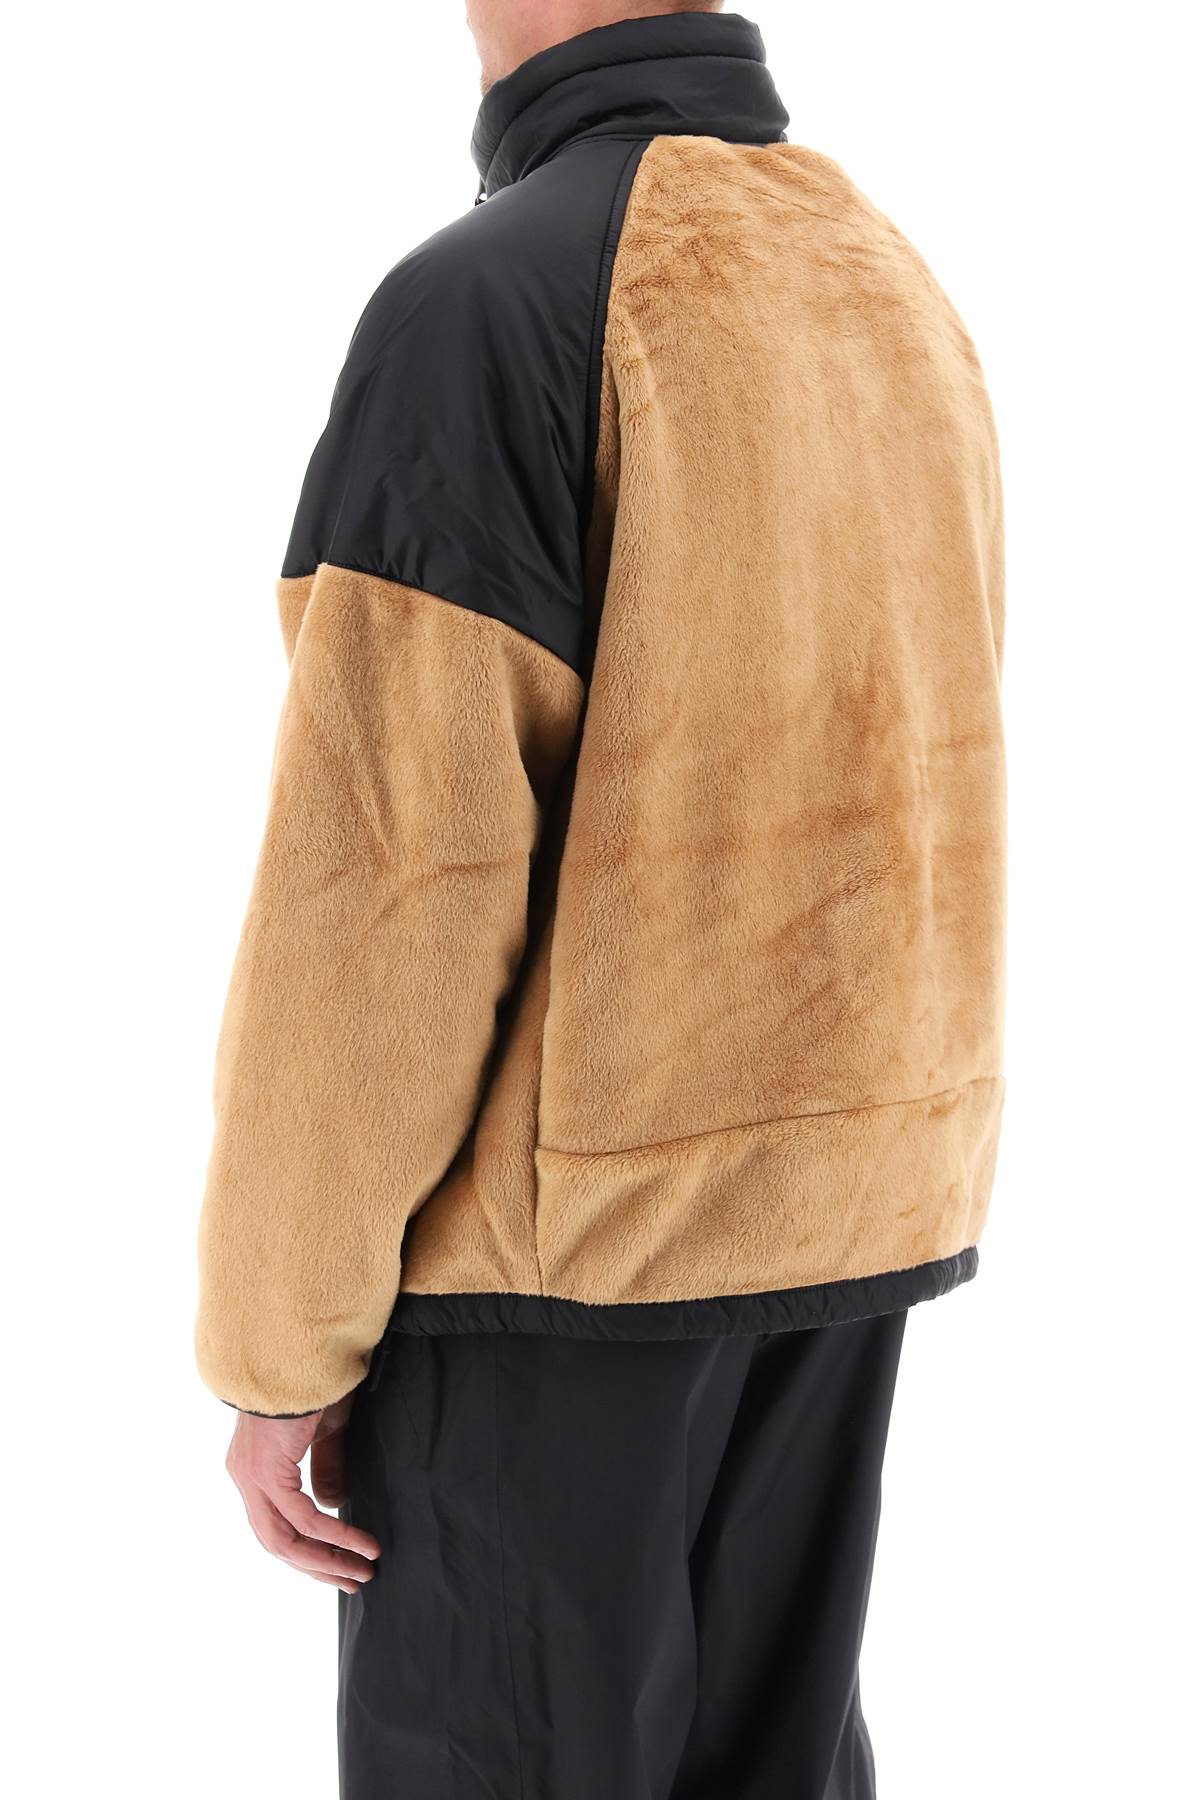 The north face fleece jacket with nylon inserts-2